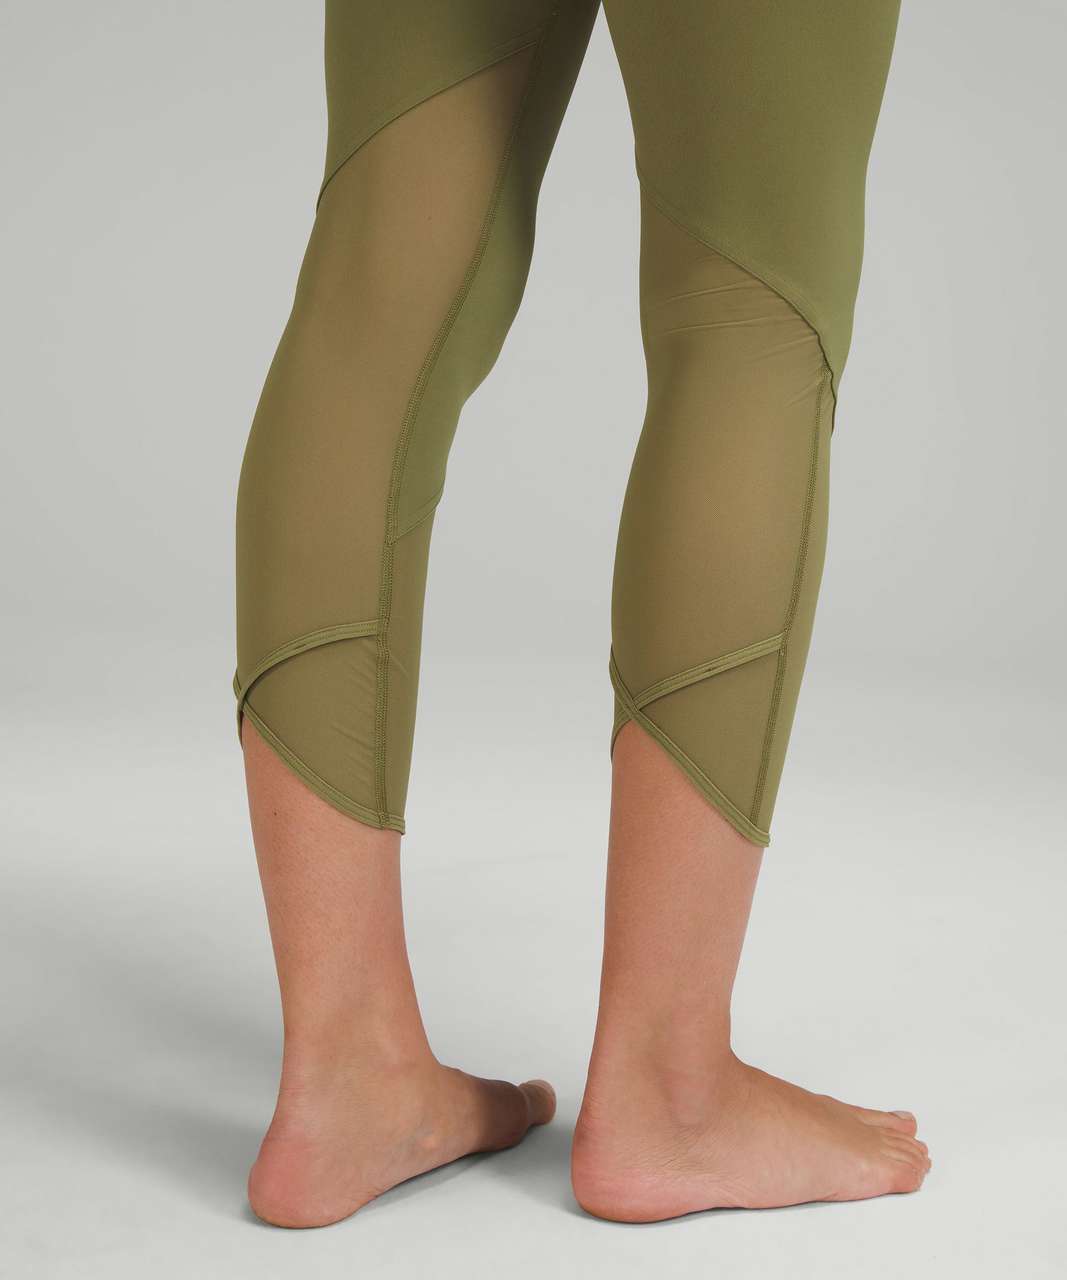 Nulu and Crisscross mesh stirrup tight in black and bronze green released  in Aus : r/lululemon